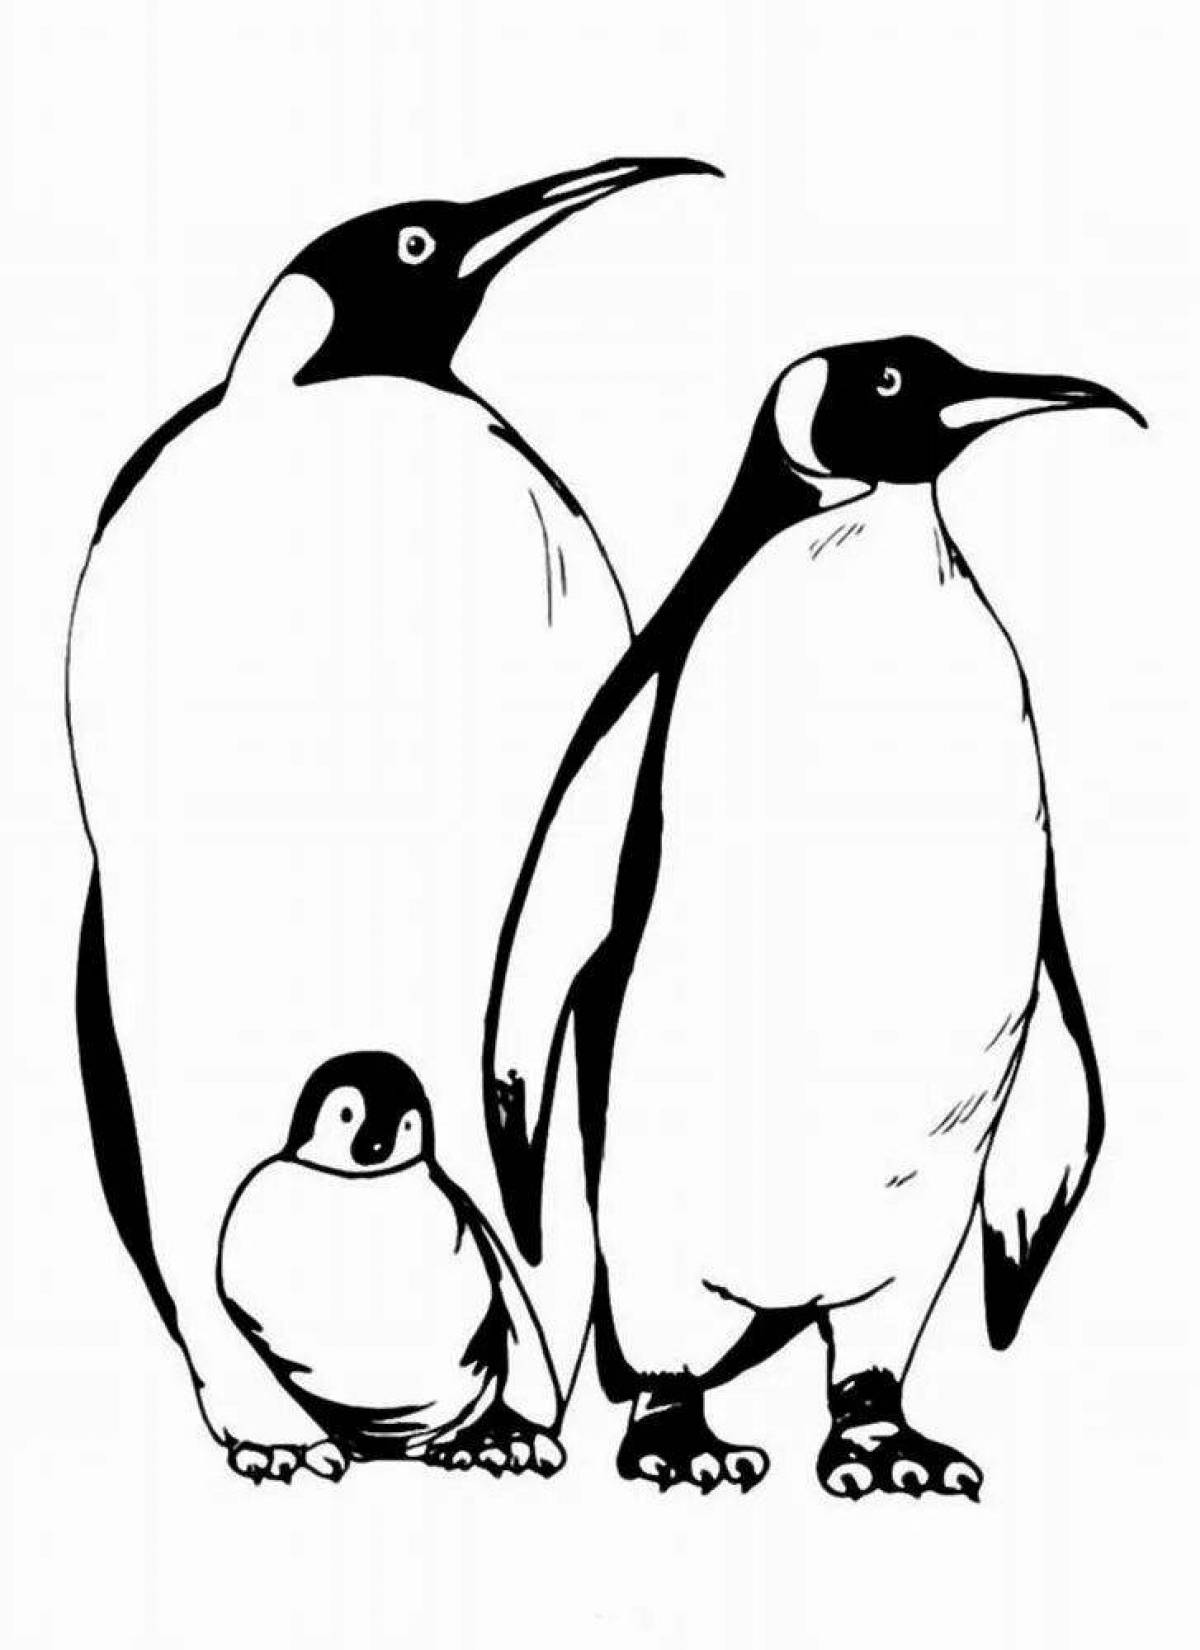 Impressive drawing of a penguin